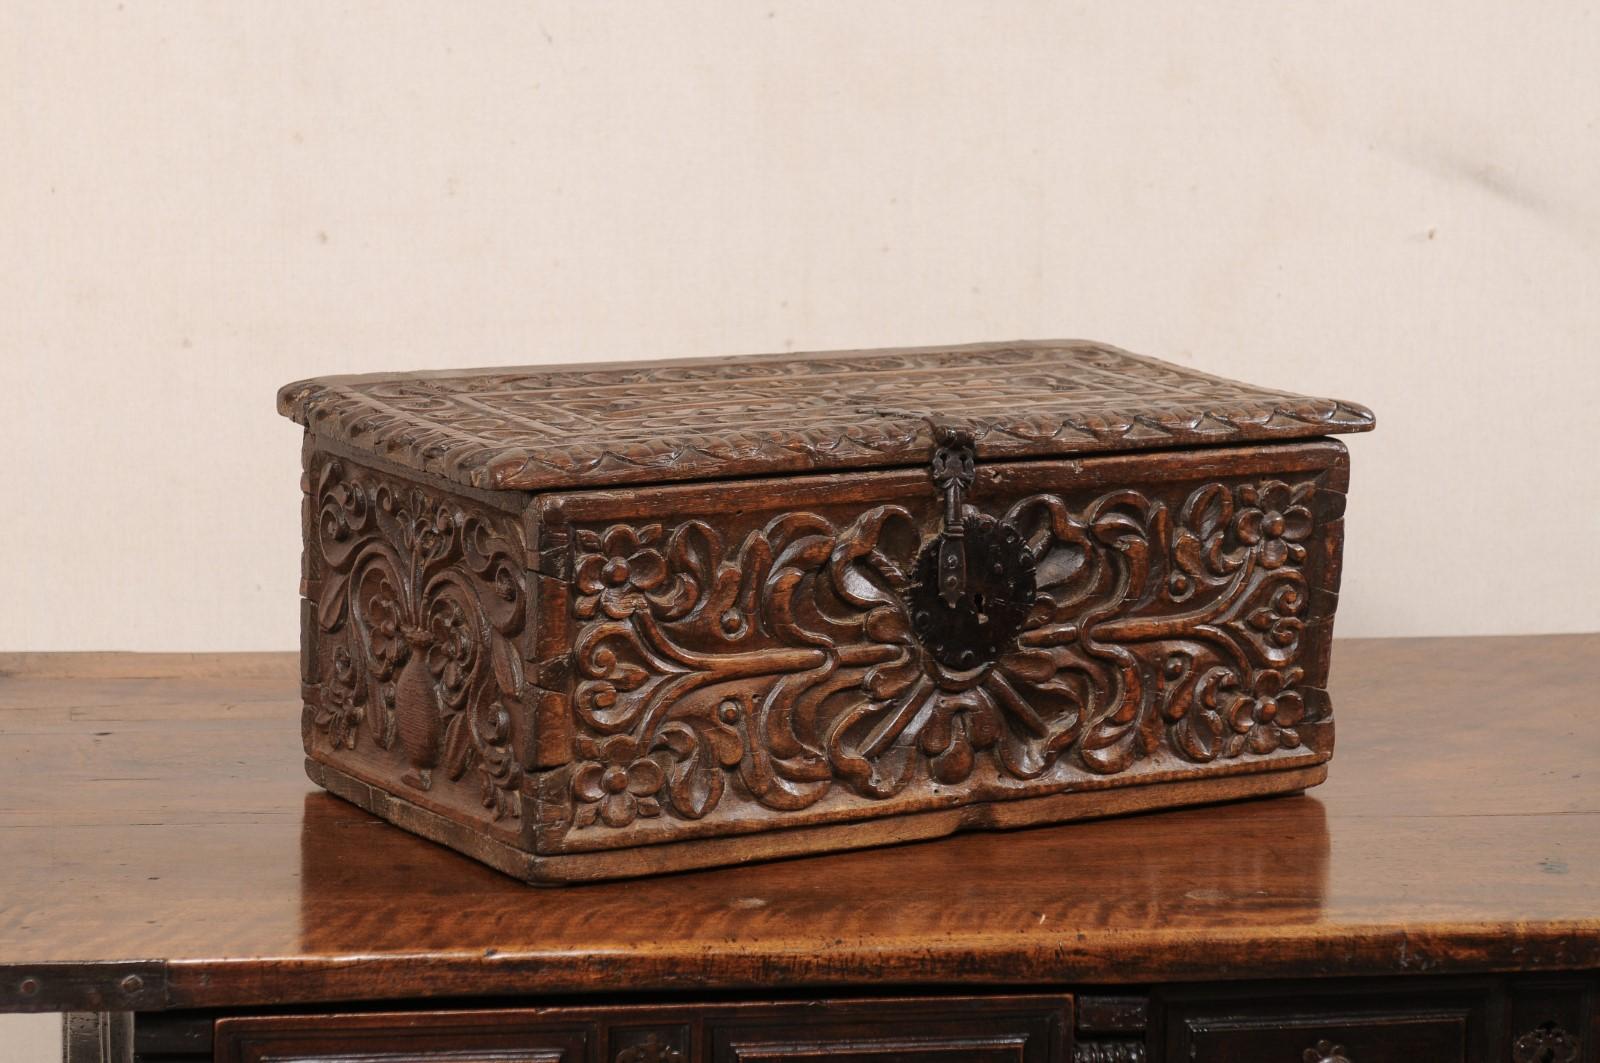 A Spanish Colonial carved-wood storage box from the 18th century. This antique Spanish Colonial period chest has rectangular shape with flat topside, which has been adorned with heavy foliate theme hand-carvings about the top and all four sides